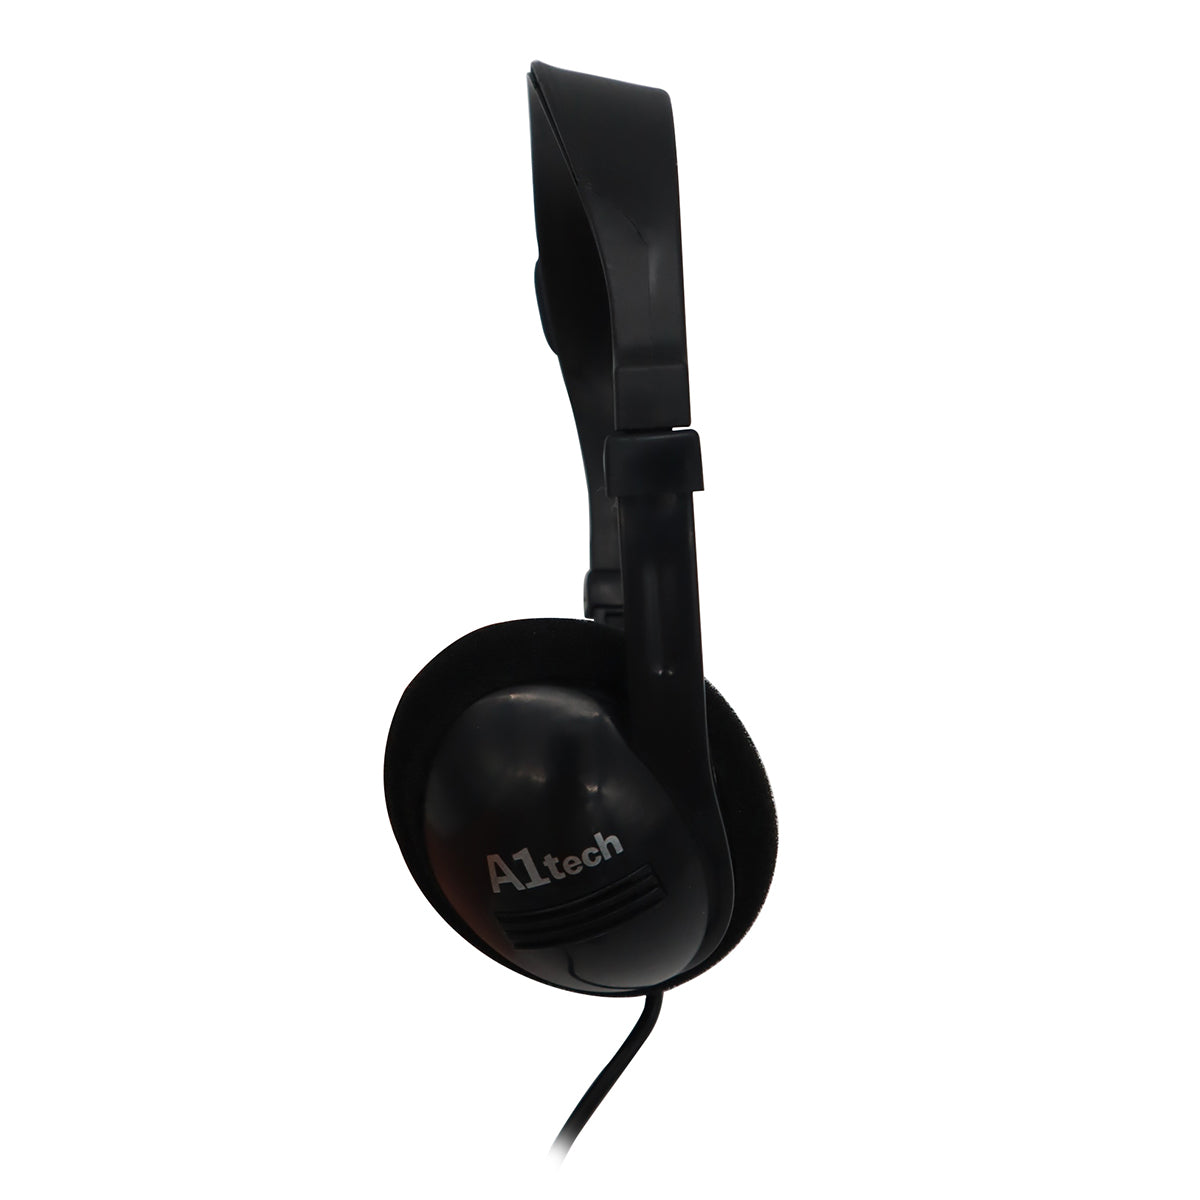 A1TECH AAH-002S SINGLE 4 PIN JACK HEADSET WITH MICROPHONE & CONTROLLER